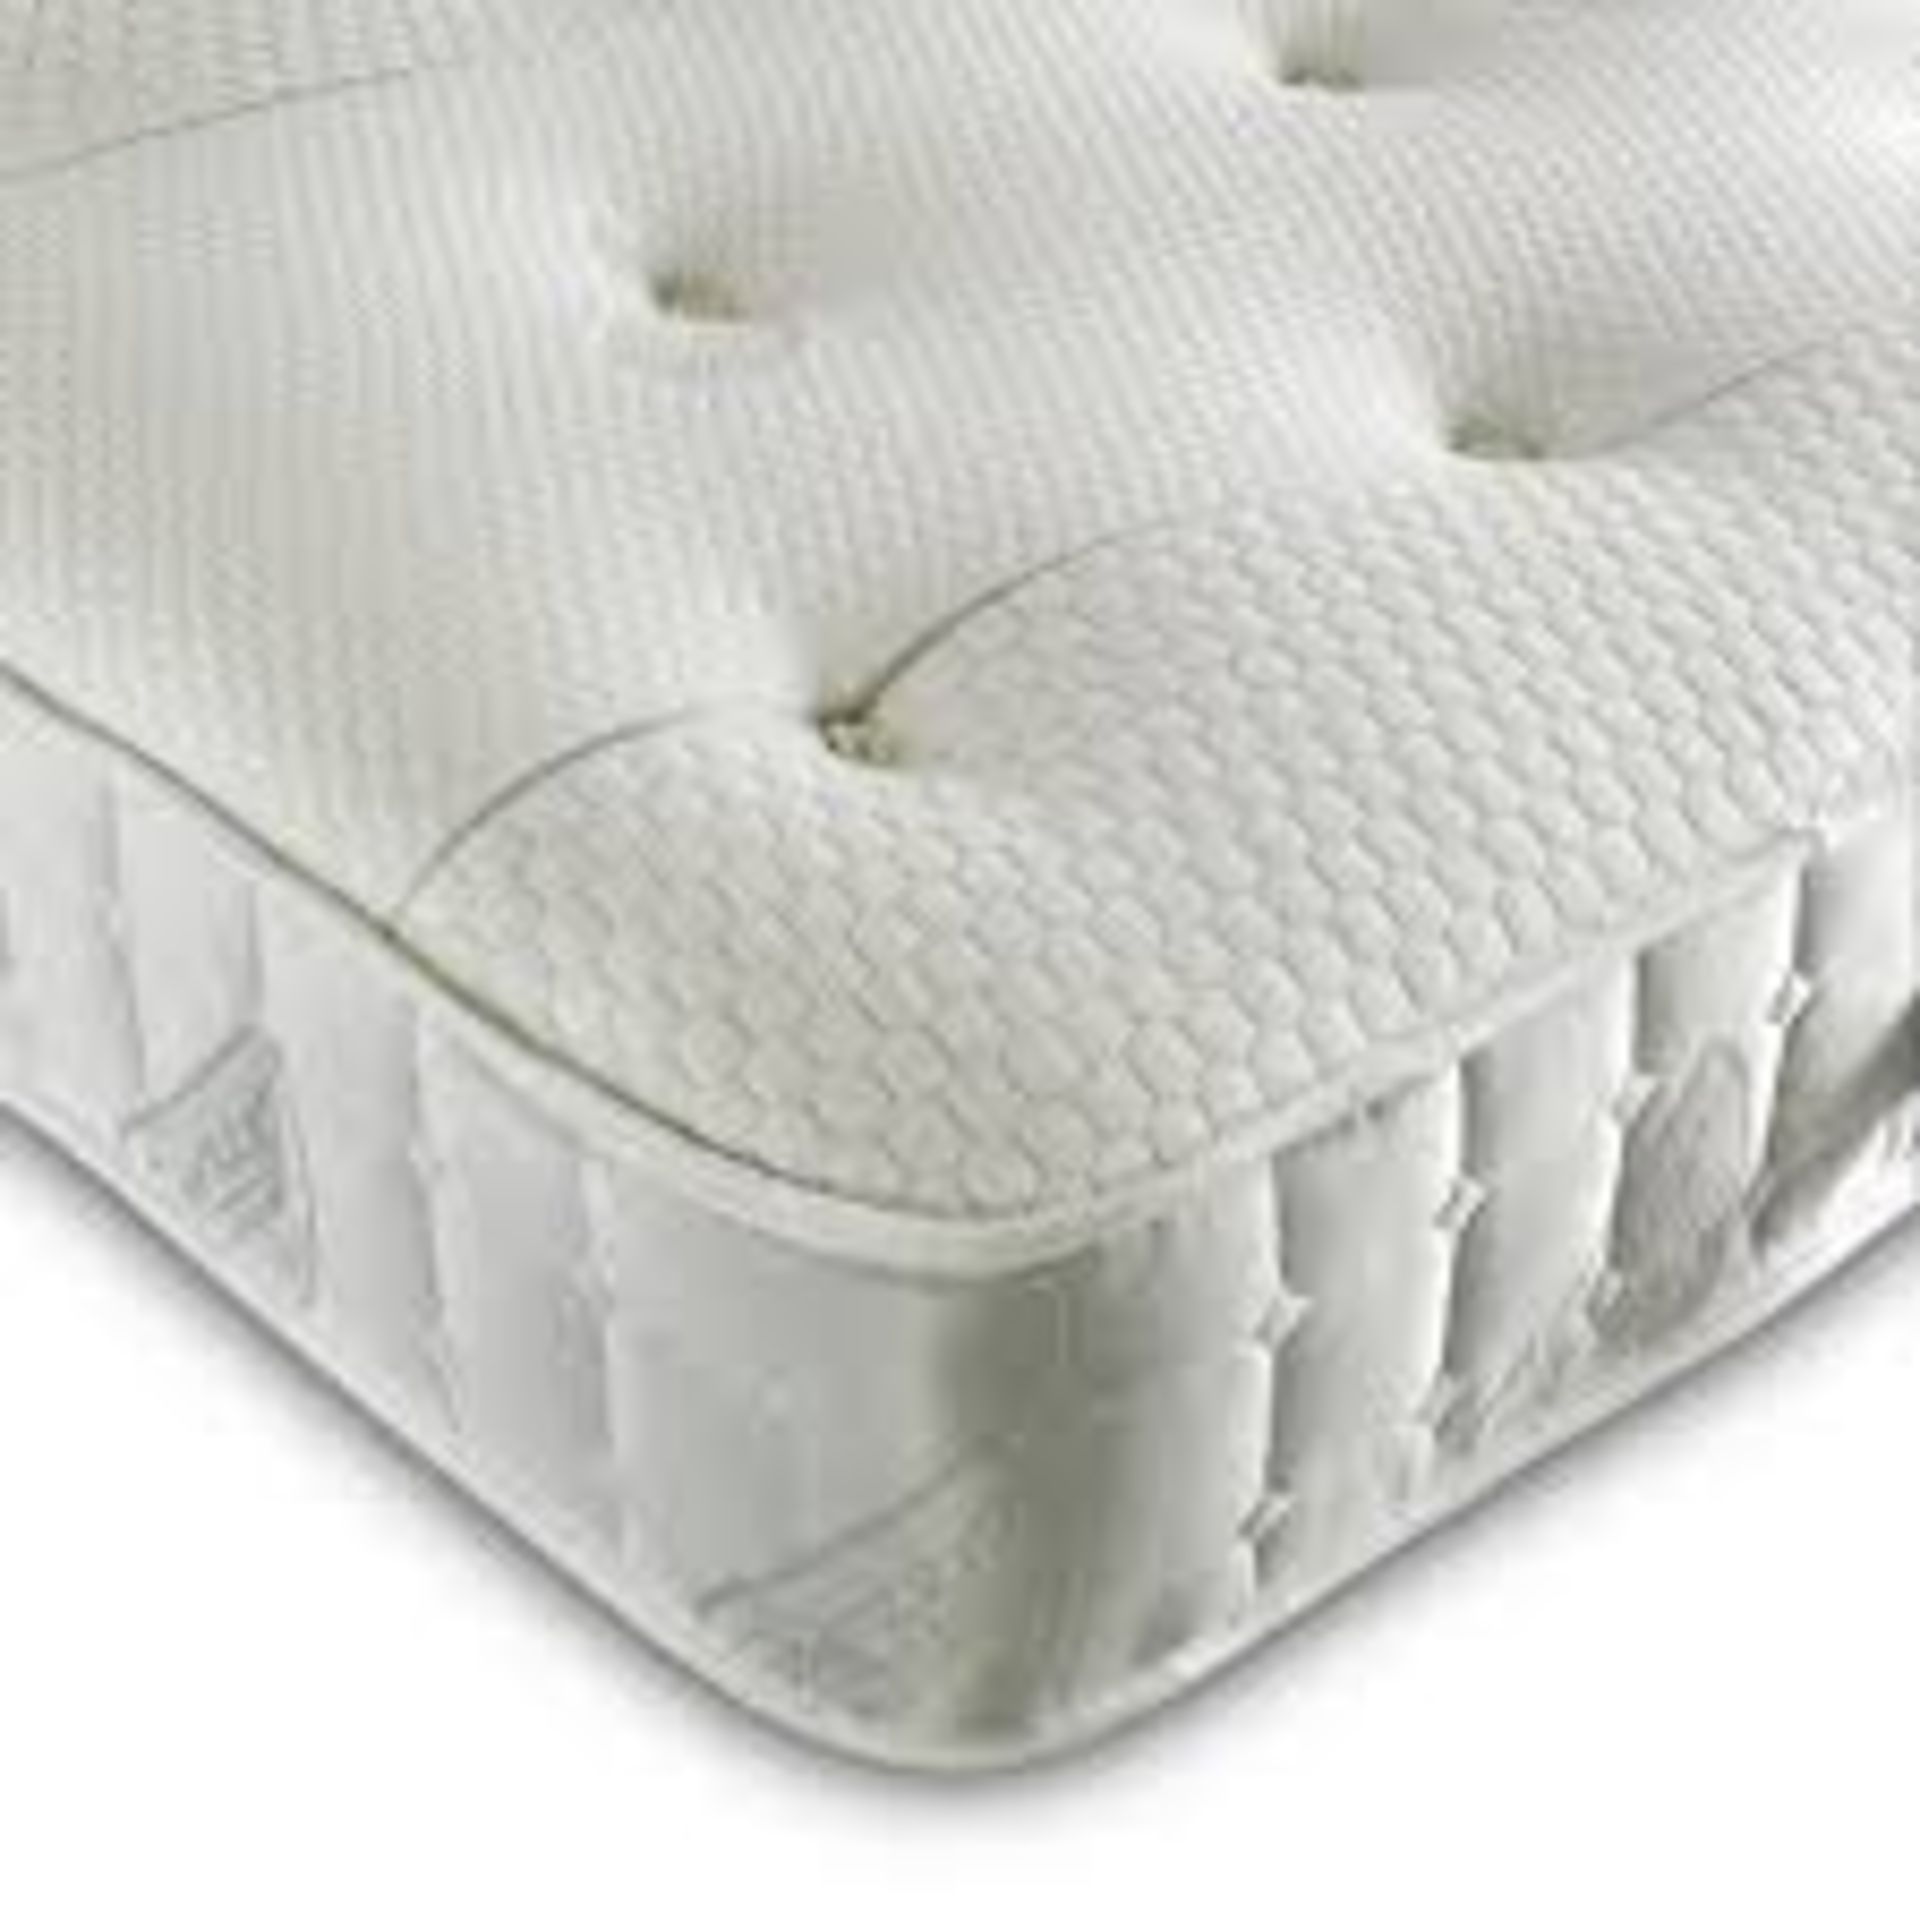 Boxed Super King-size Memory Coil Mattress RRP £180 (15408) (Public Viewing and Appraisals